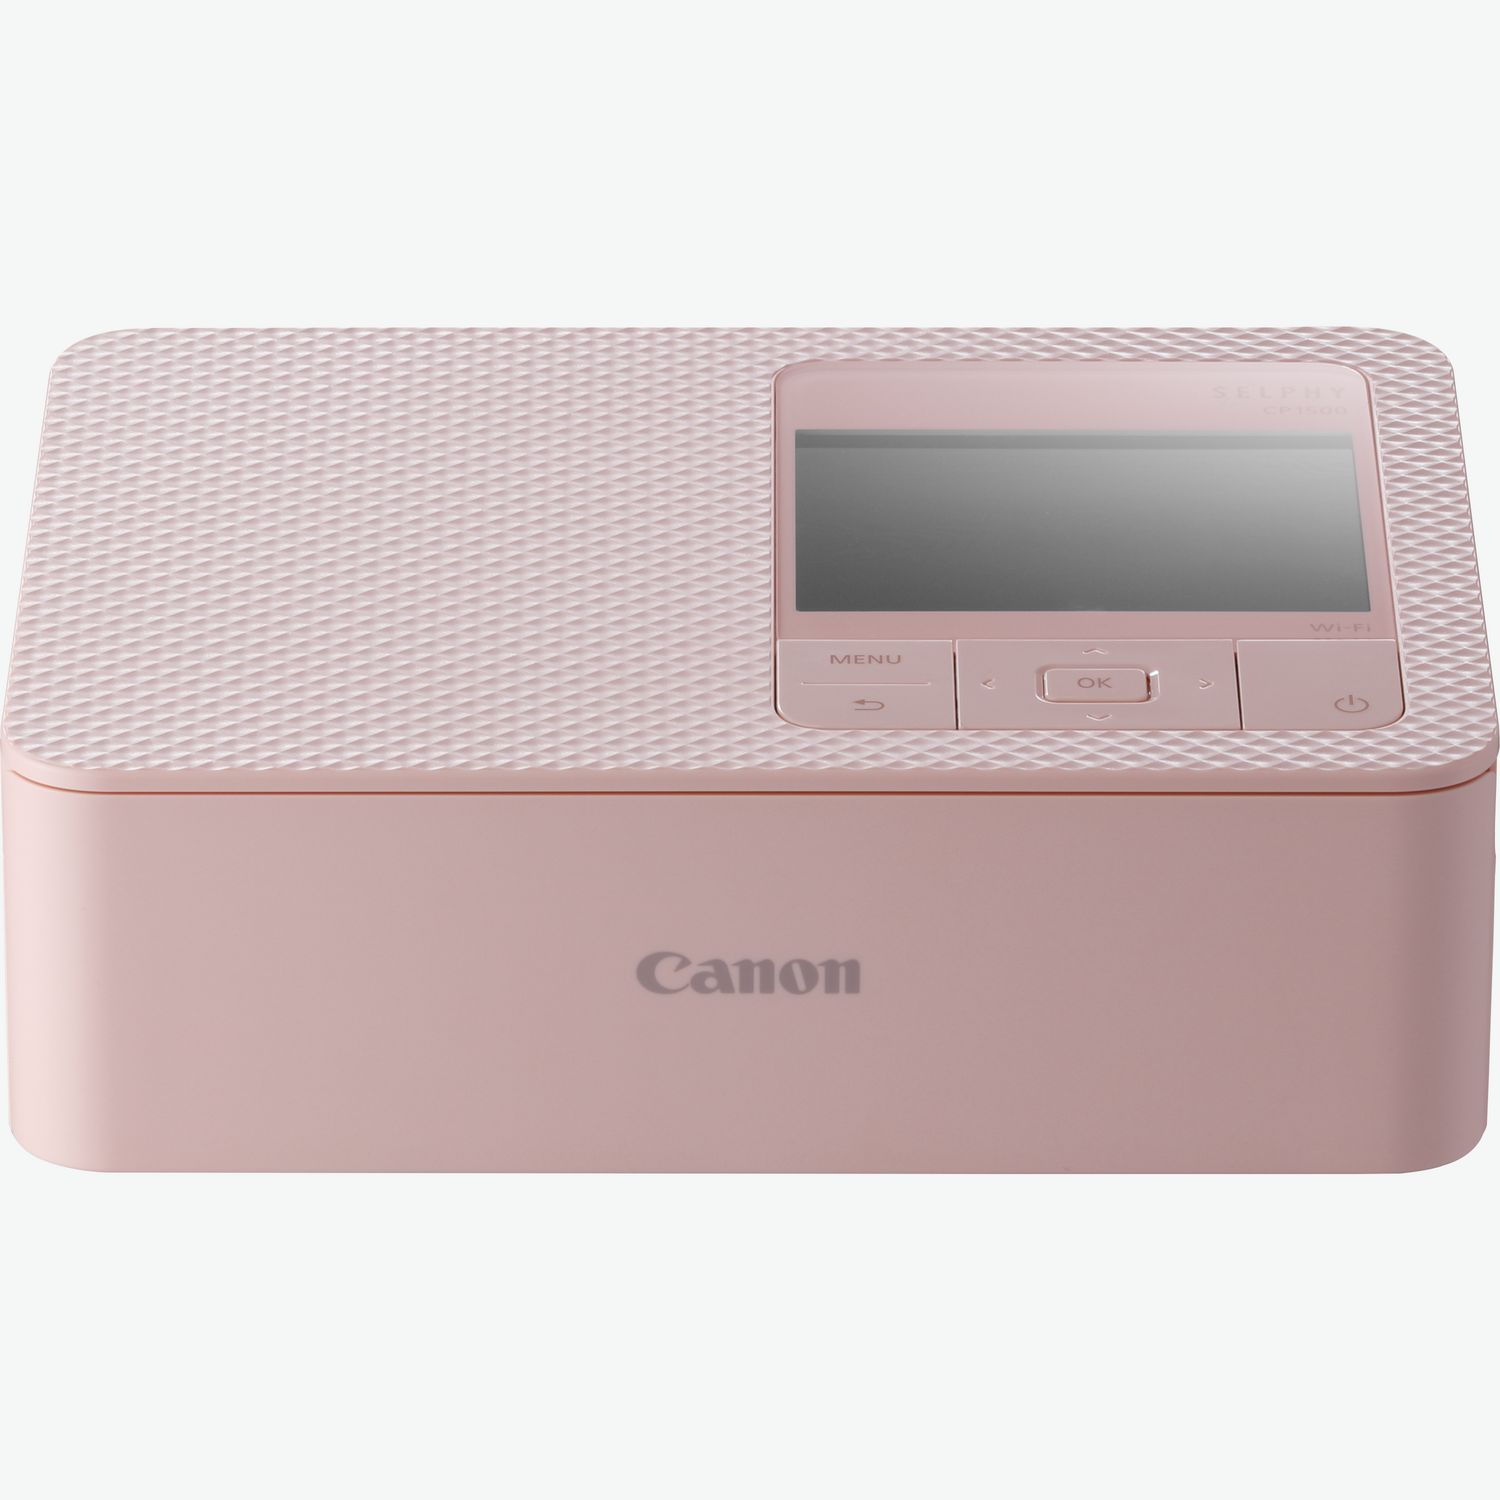 Canon Selphy Cp1000 Photo Printer With Detachable Battery And Ink Cassette  + 36 Sheets Paper